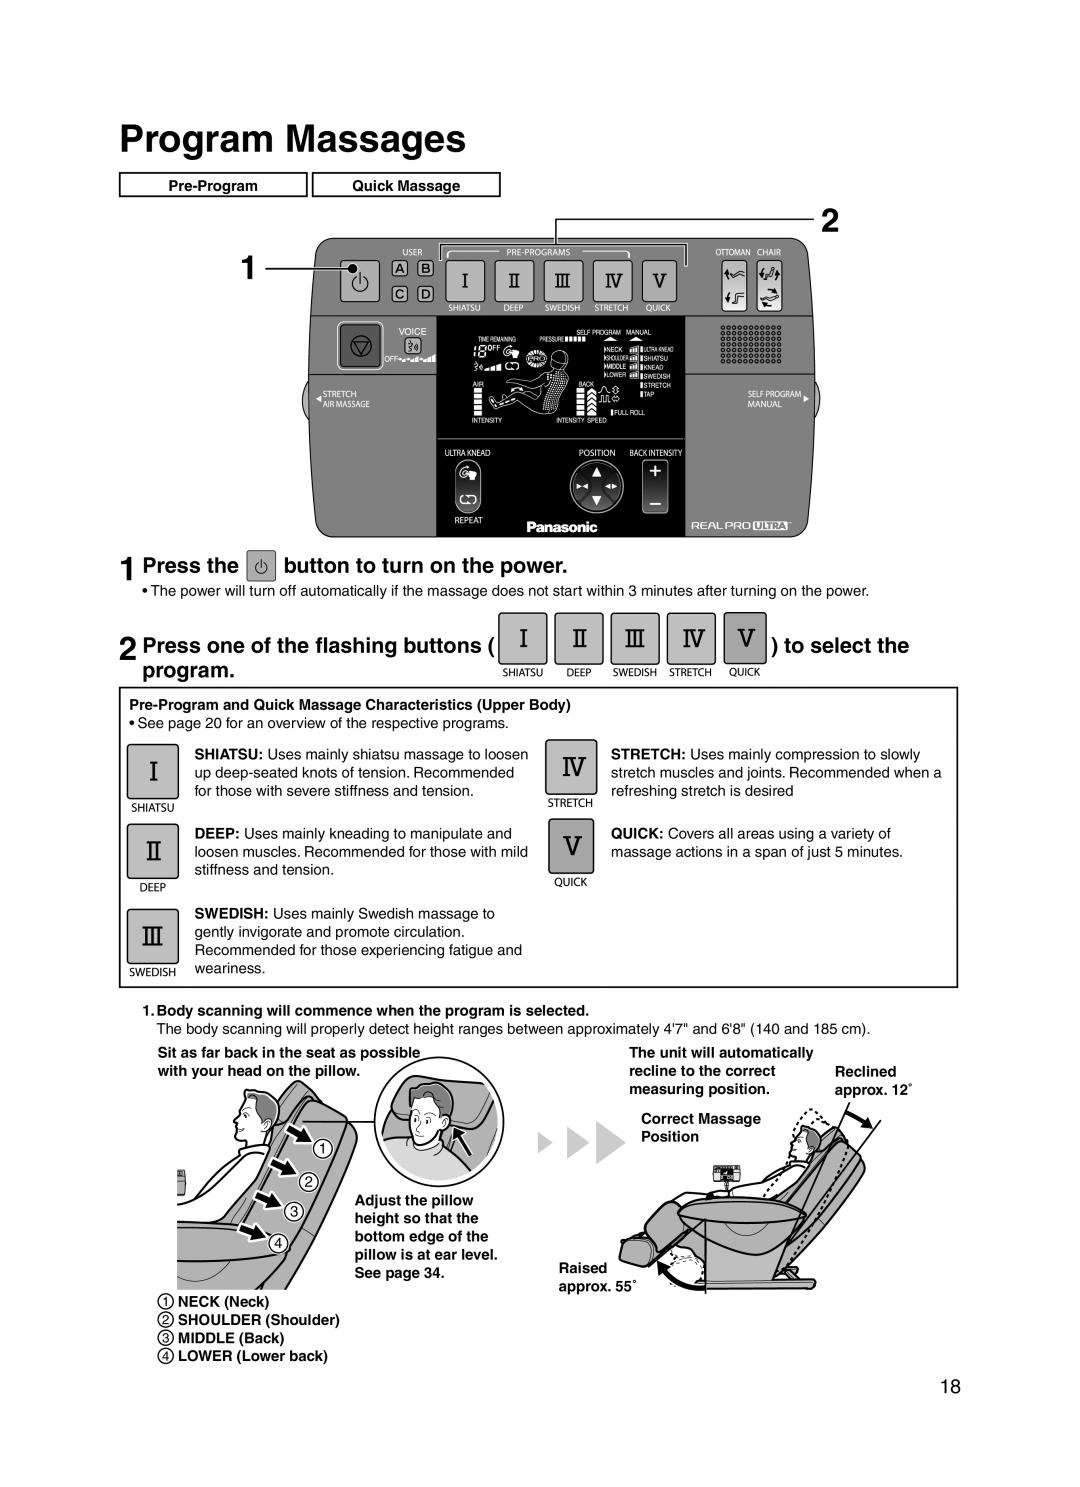 Panasonic 30003 Program Massages, Press the button to turn on the power, Press one of the flashing buttons, to select the 